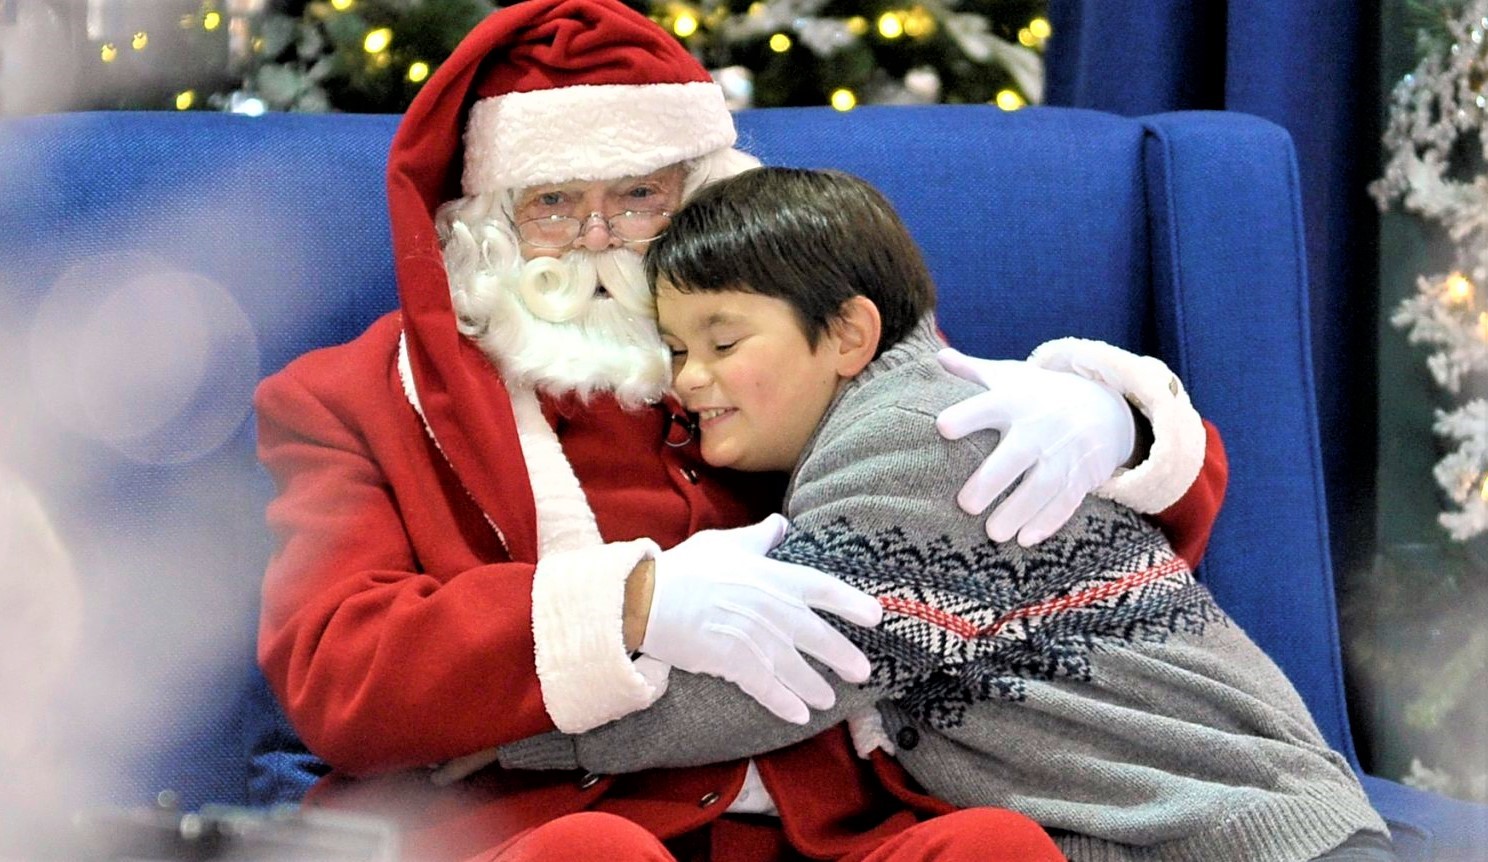 Featured image for “The Myth of Santa Claus and Developmental Loss ”